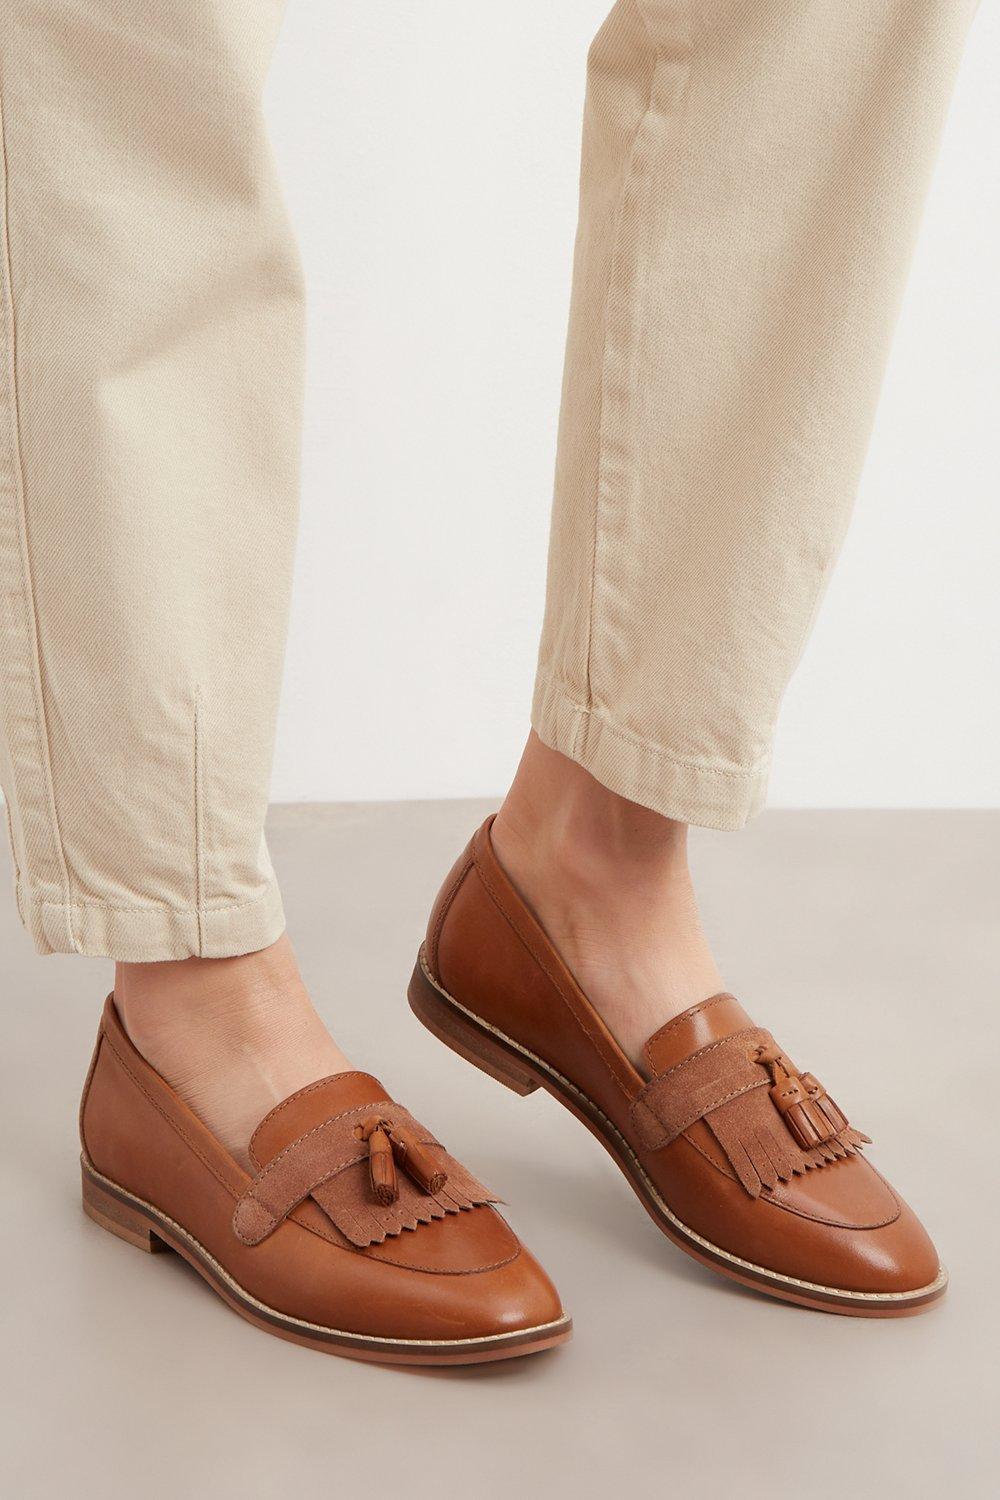 Womens Principles: Colette Leather Fringed Loafers